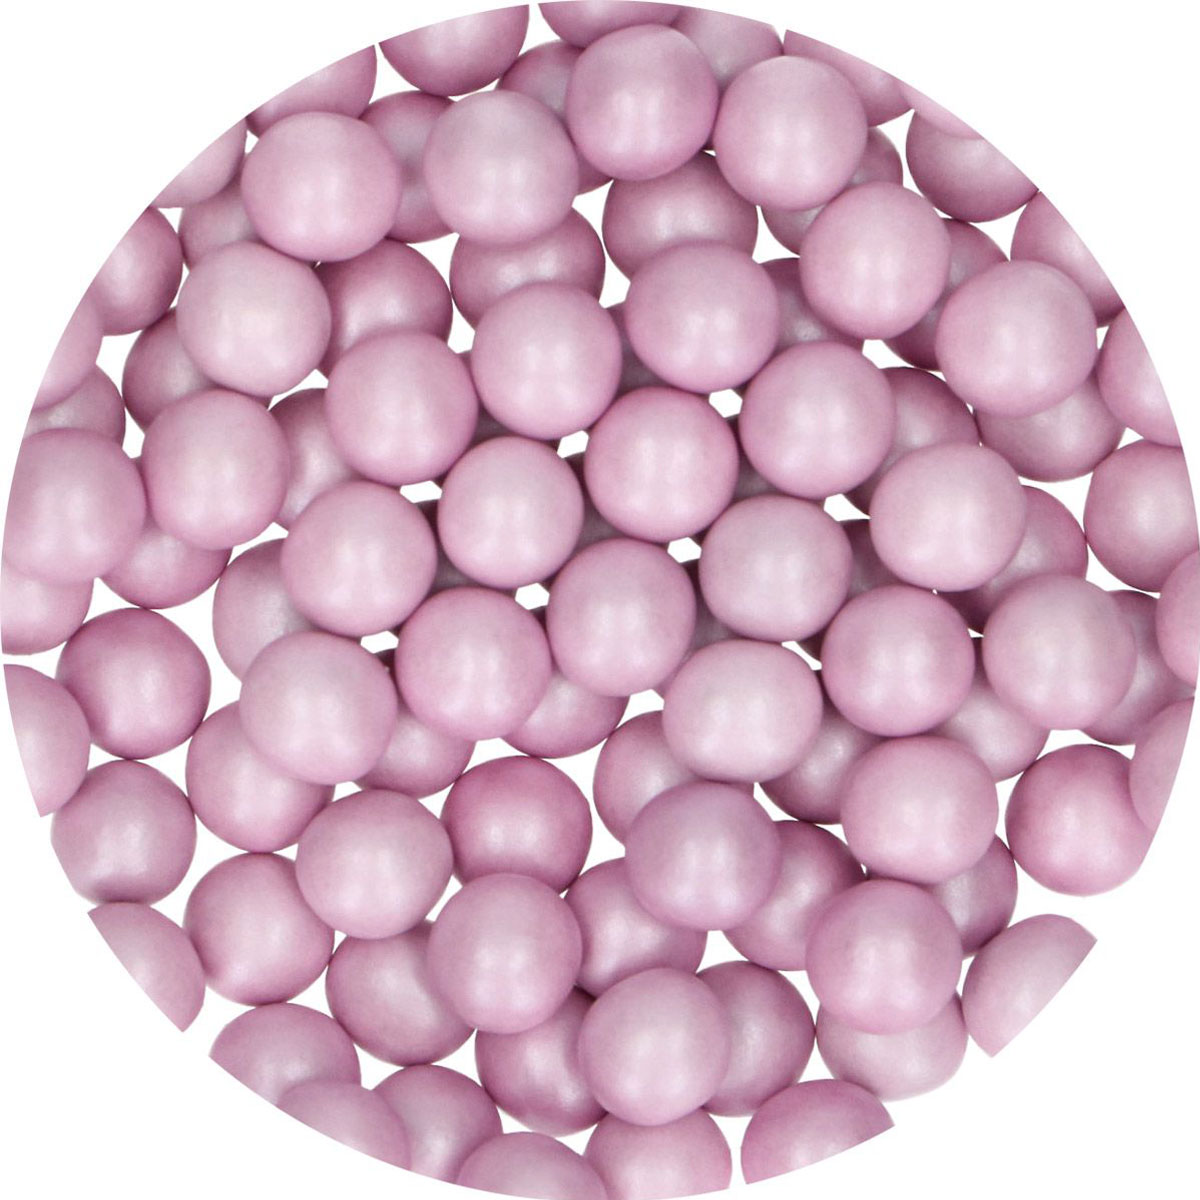 FunCakes Candy Choco Pearls Large Lilac 70g 